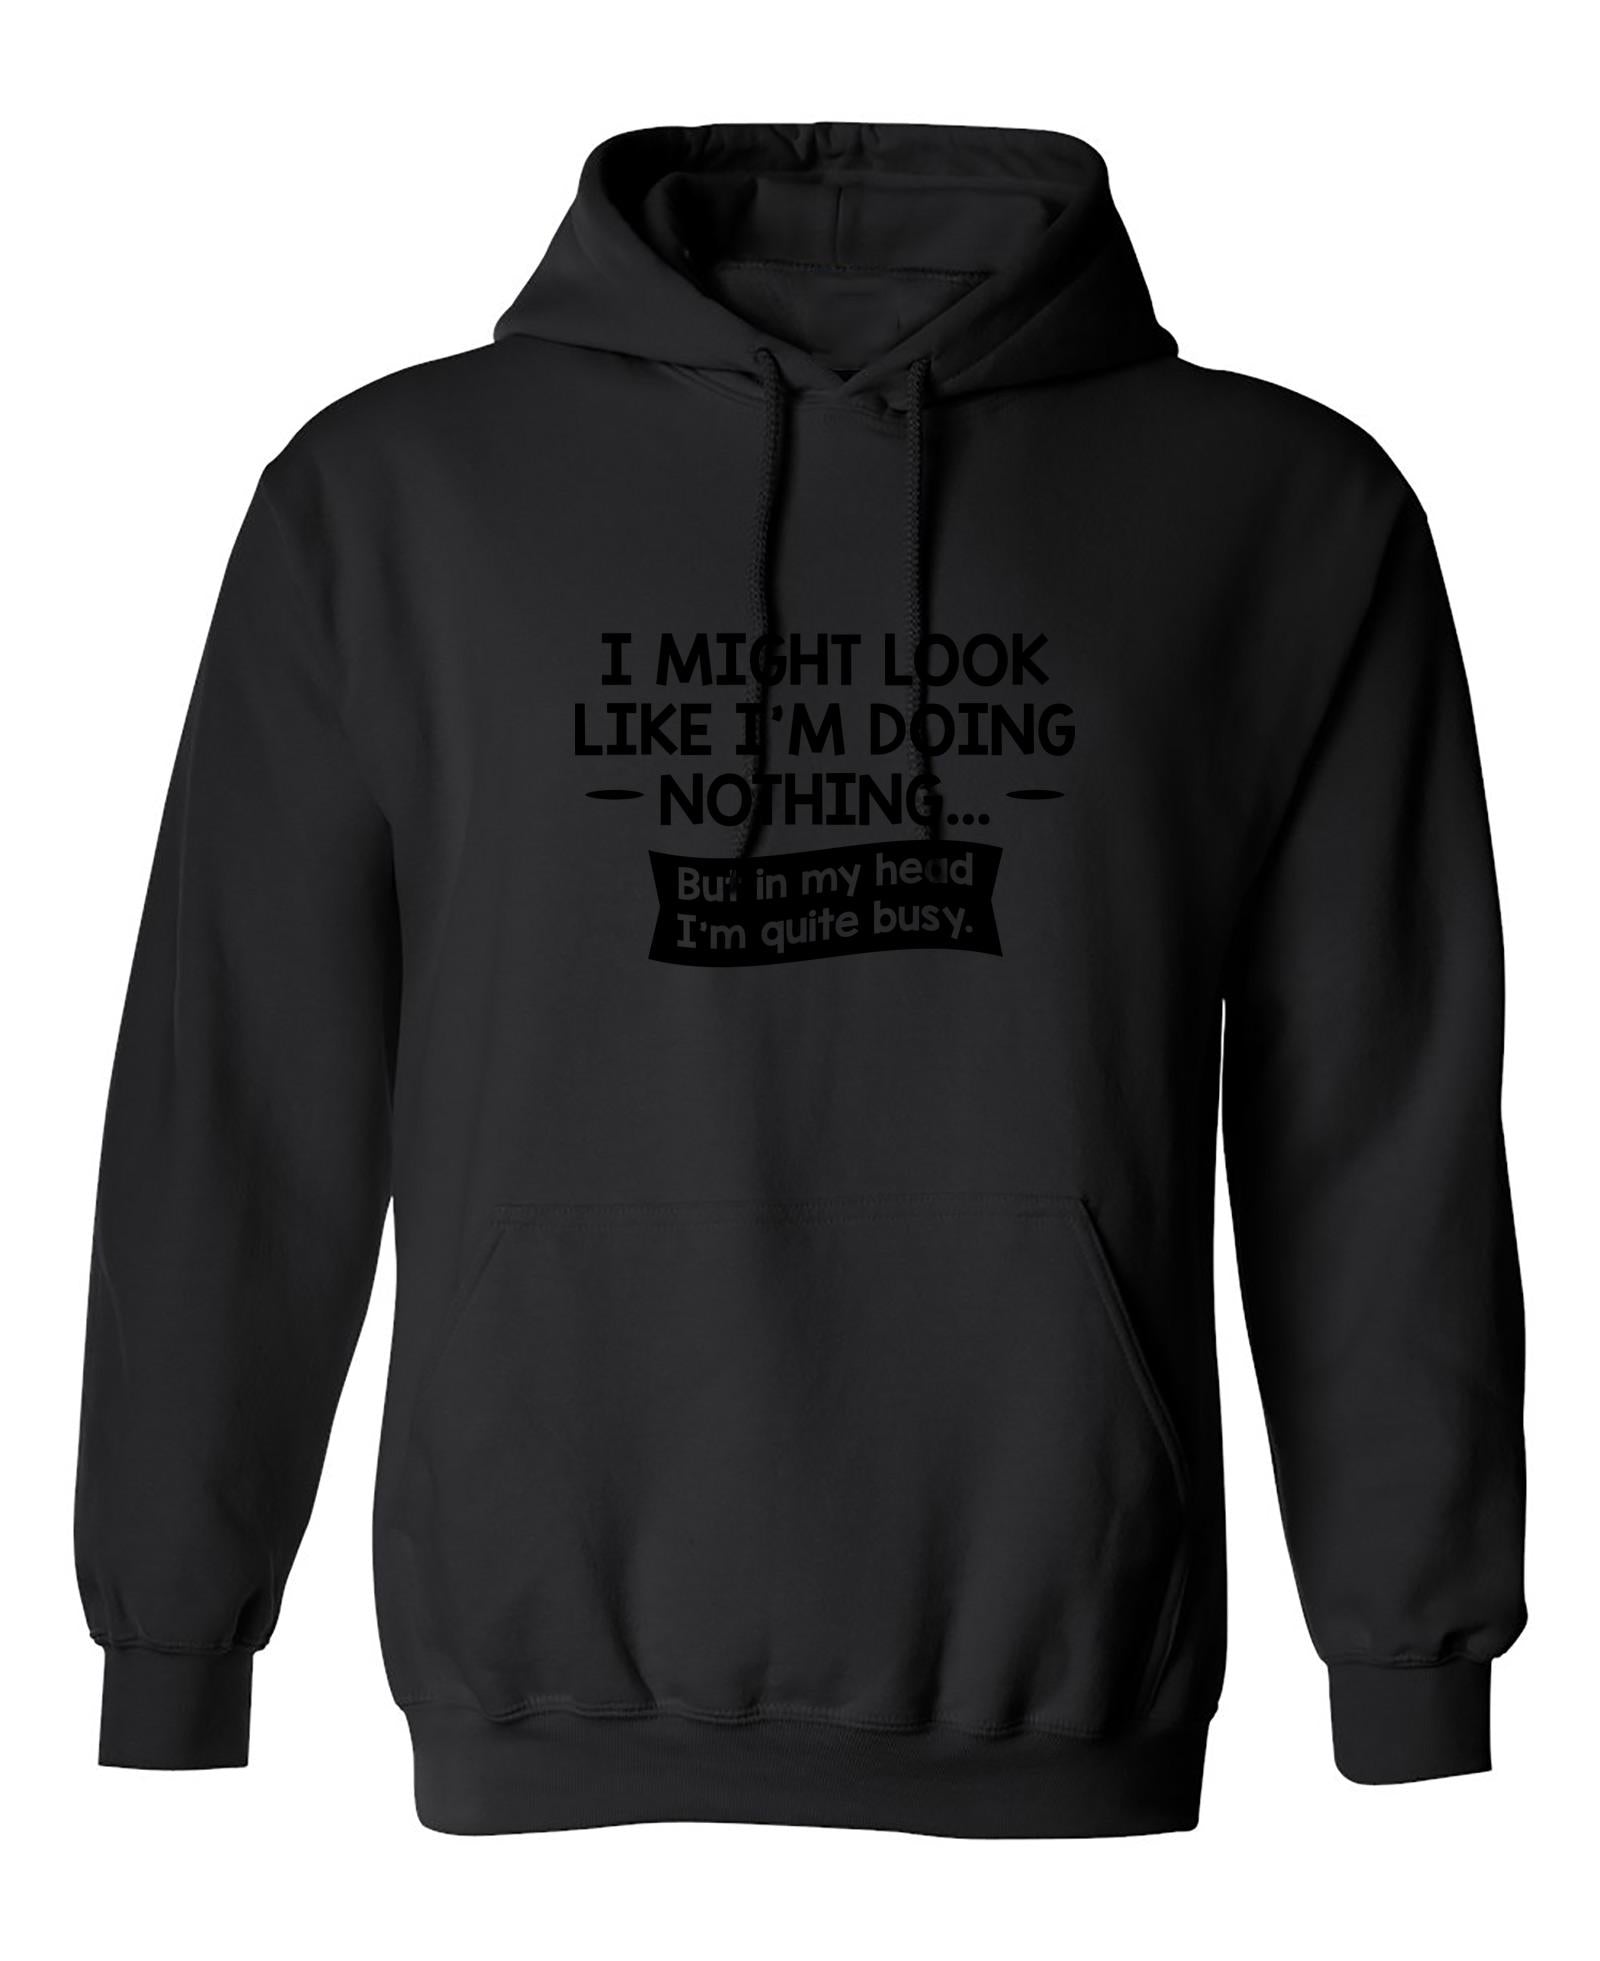 Funny T-Shirts design "I might Look Like I'm Doing Nothing But In my Head I'm Quite Busy"